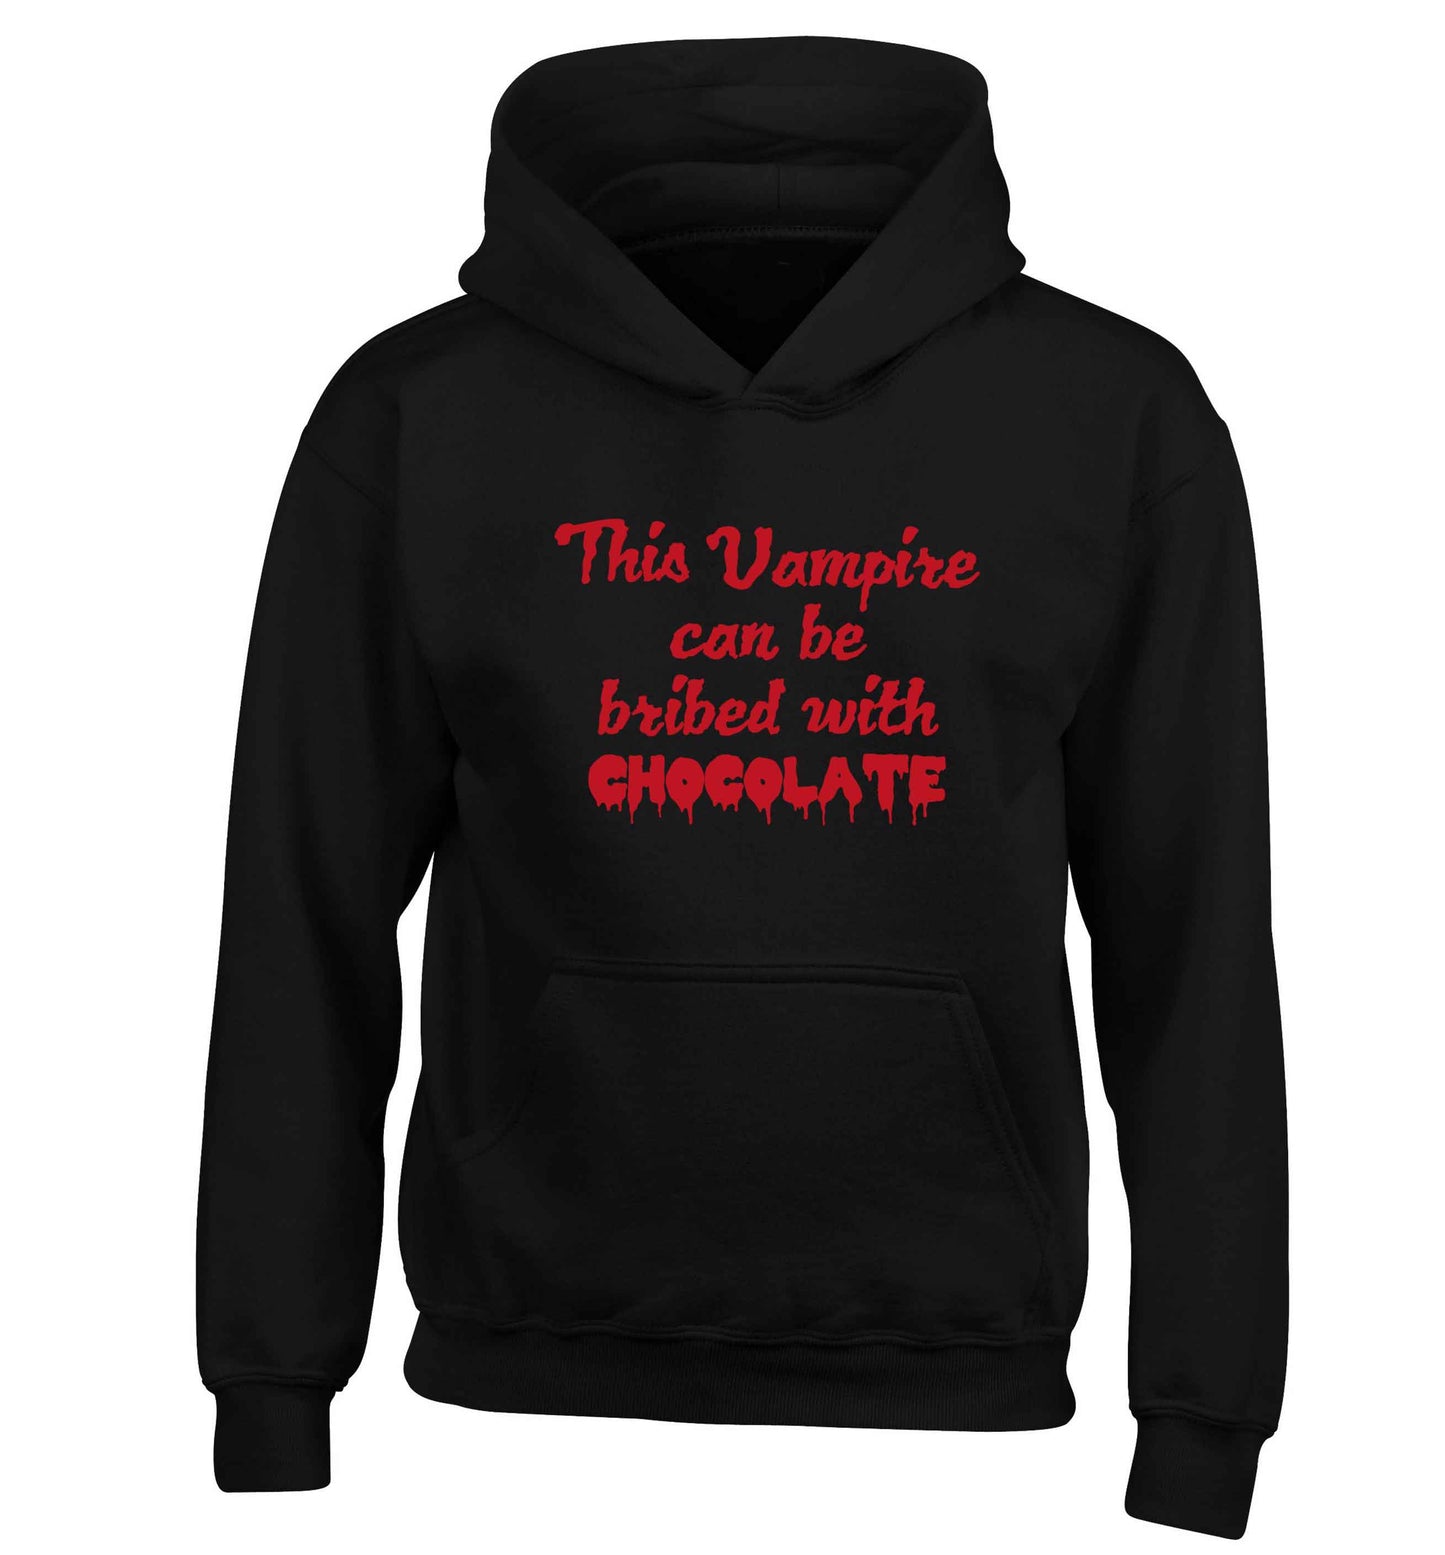 This vampire can be bribed with chocolate children's black hoodie 12-13 Years